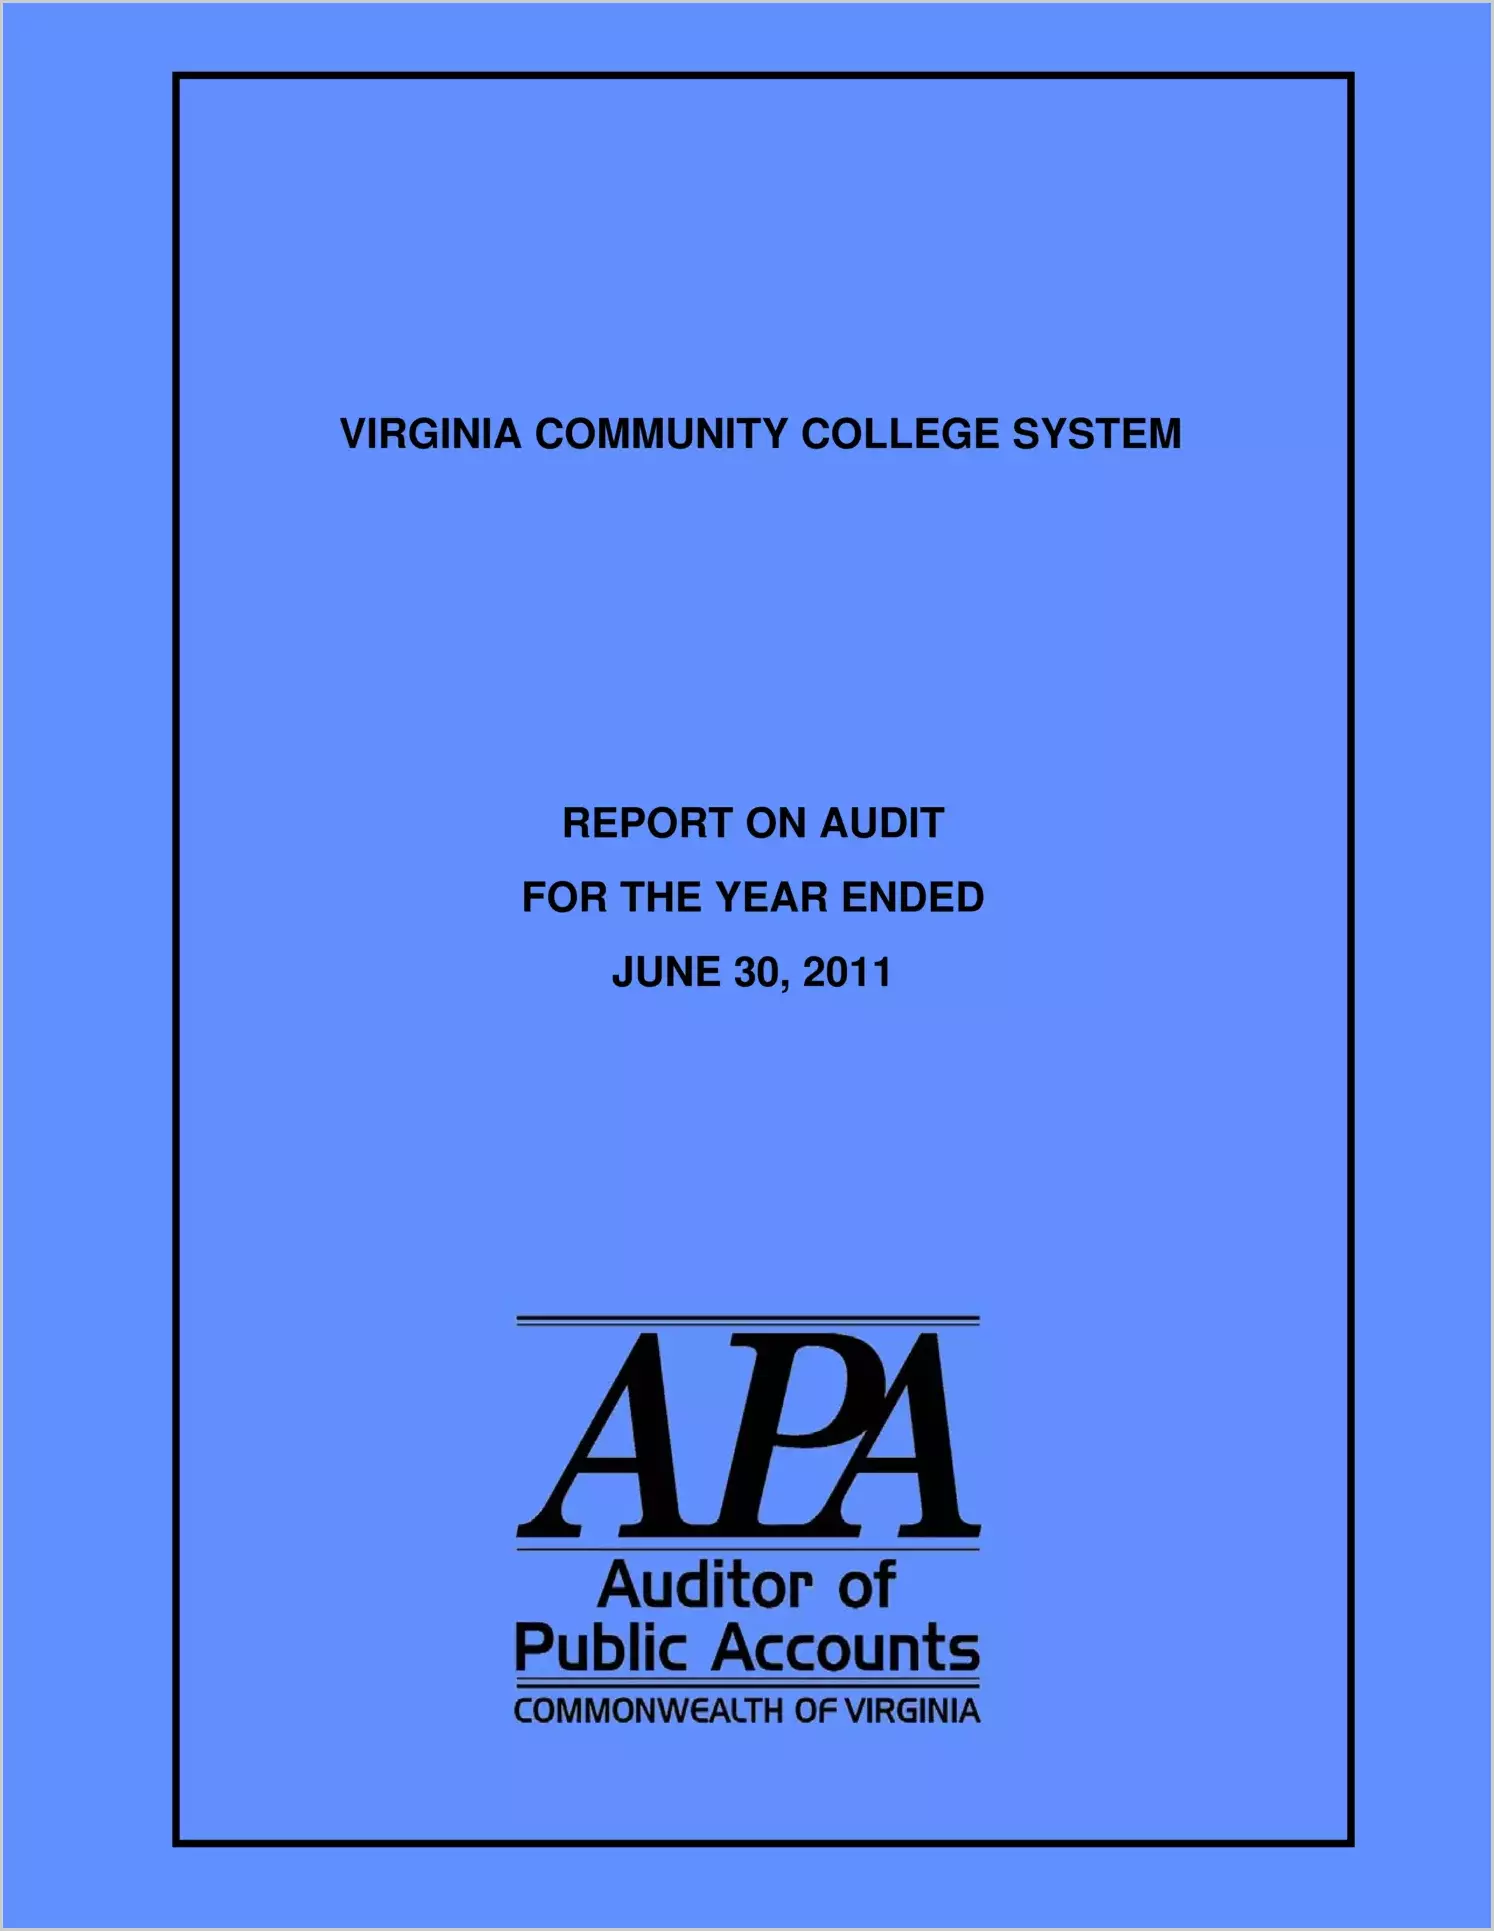 Virginia Community College System for the year ended June 30, 2011